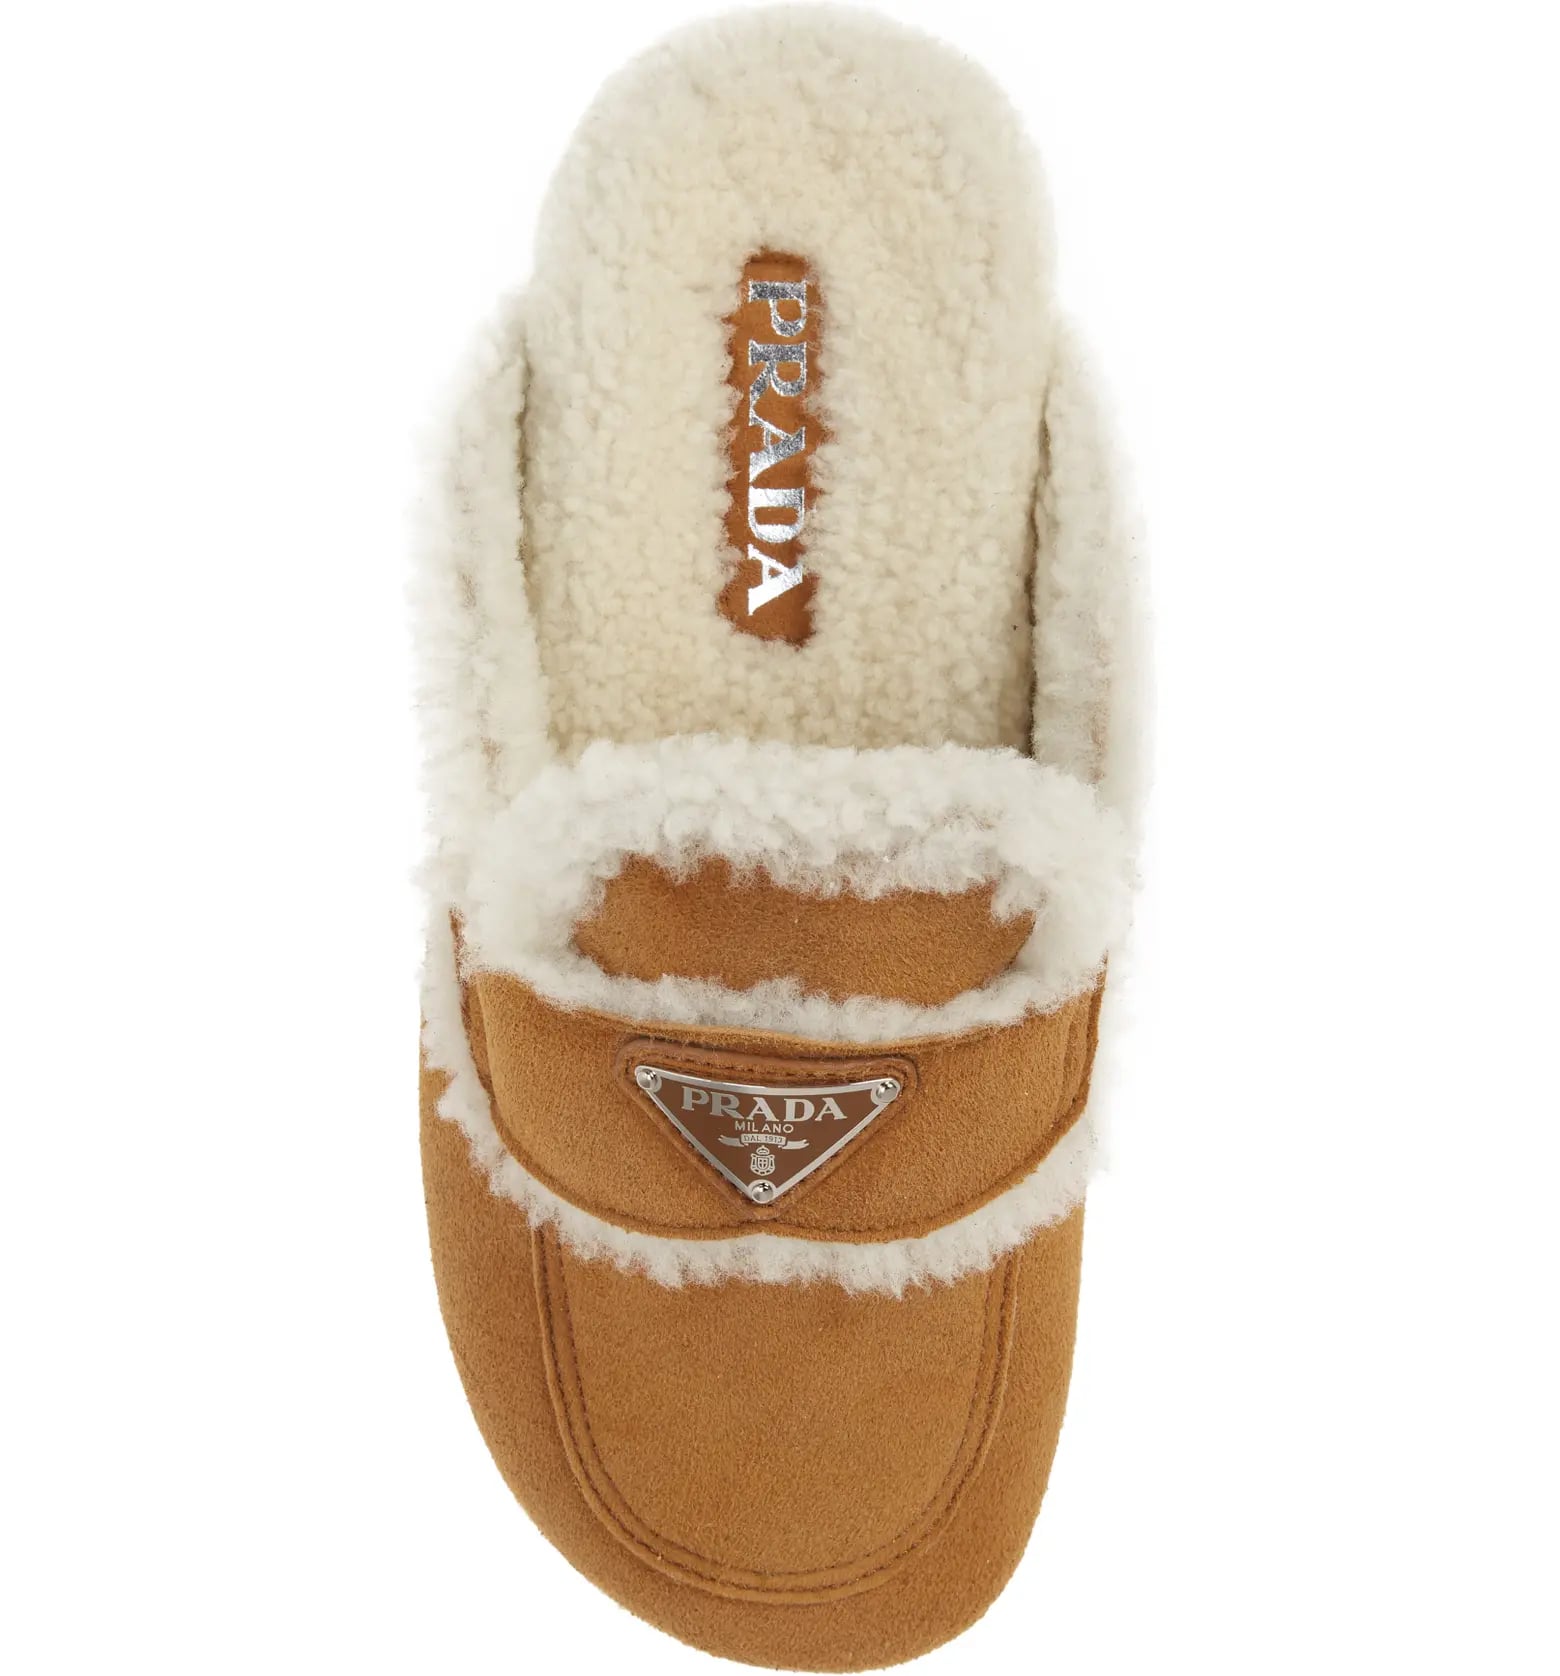 Prada Fussbet Genuine Shearling Slipper | 'Tis the Season Where It's  Socially Acceptable to Wear Shearling Slippers With Everything | POPSUGAR  Fashion Photo 11